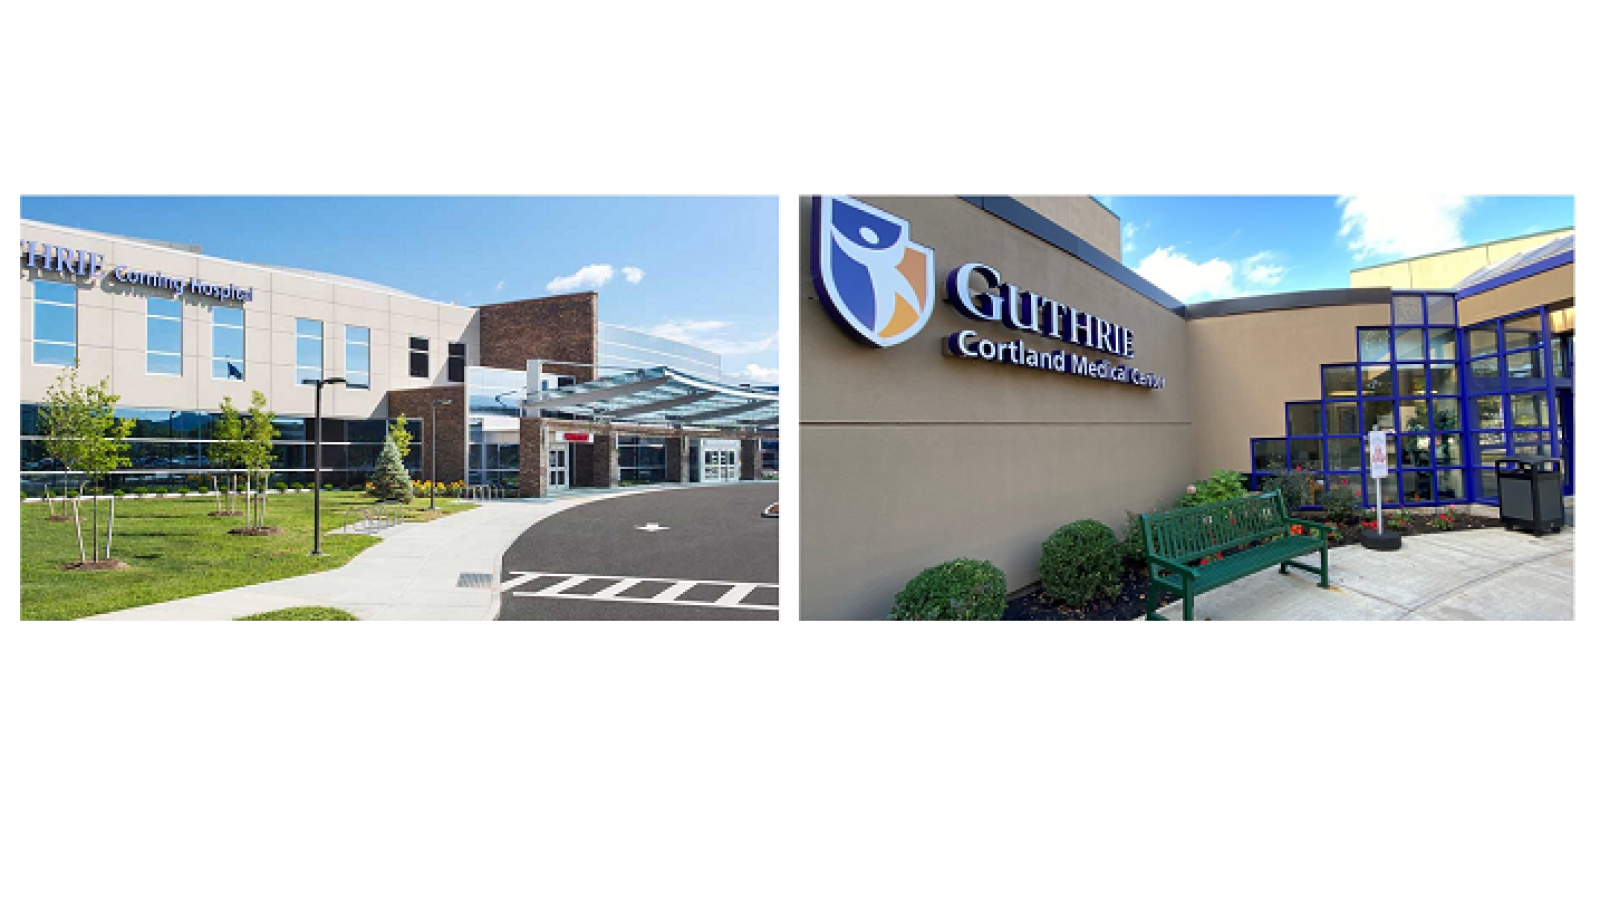 Guthrie Hospitals Named Among Great Community Hospitals Nationwide